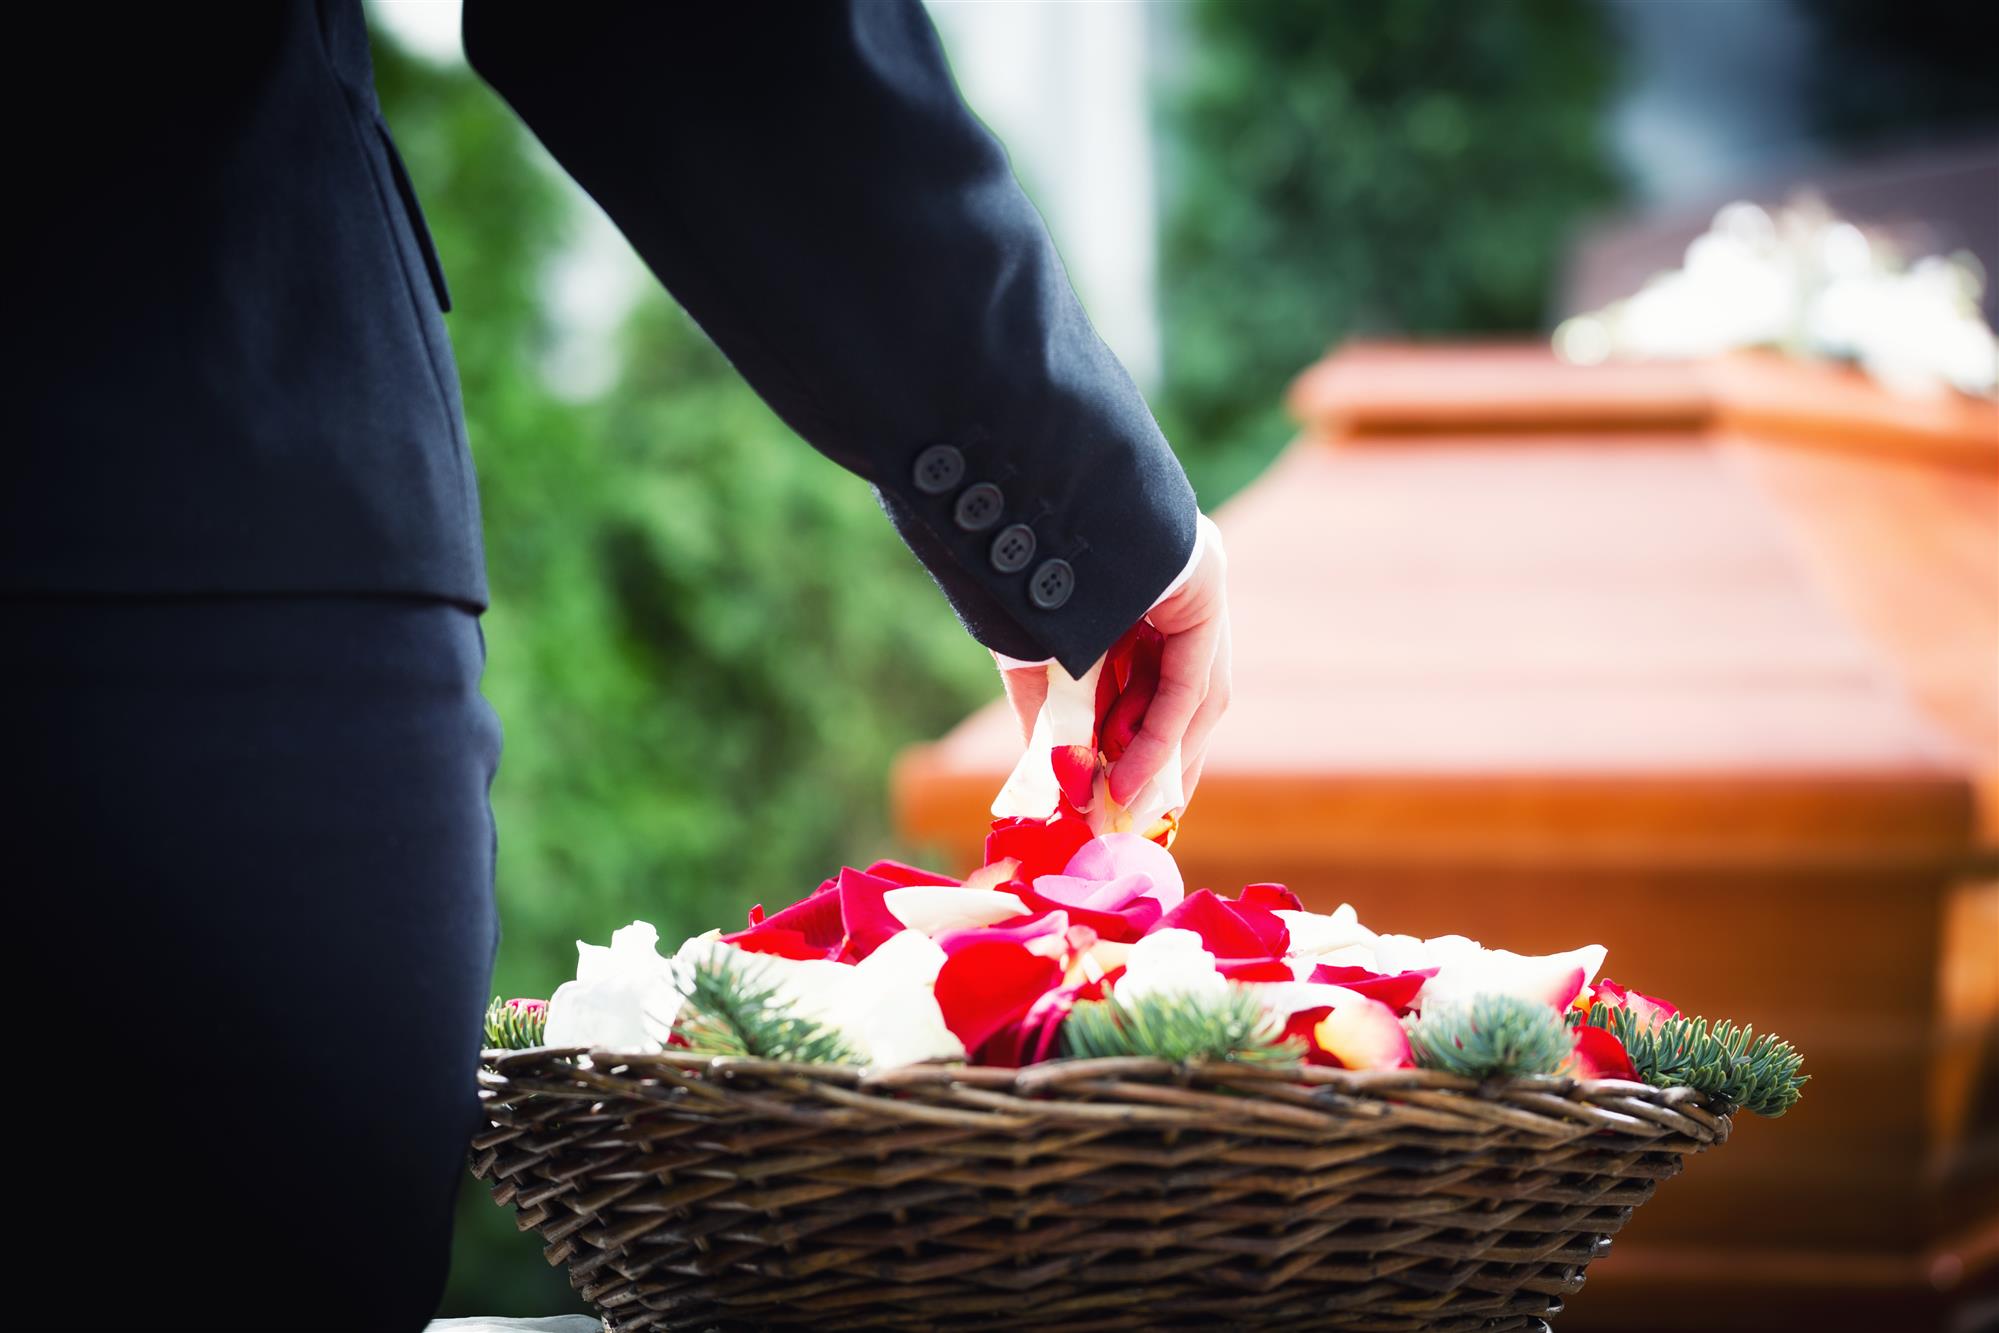 funeral putting rose petals on coffin